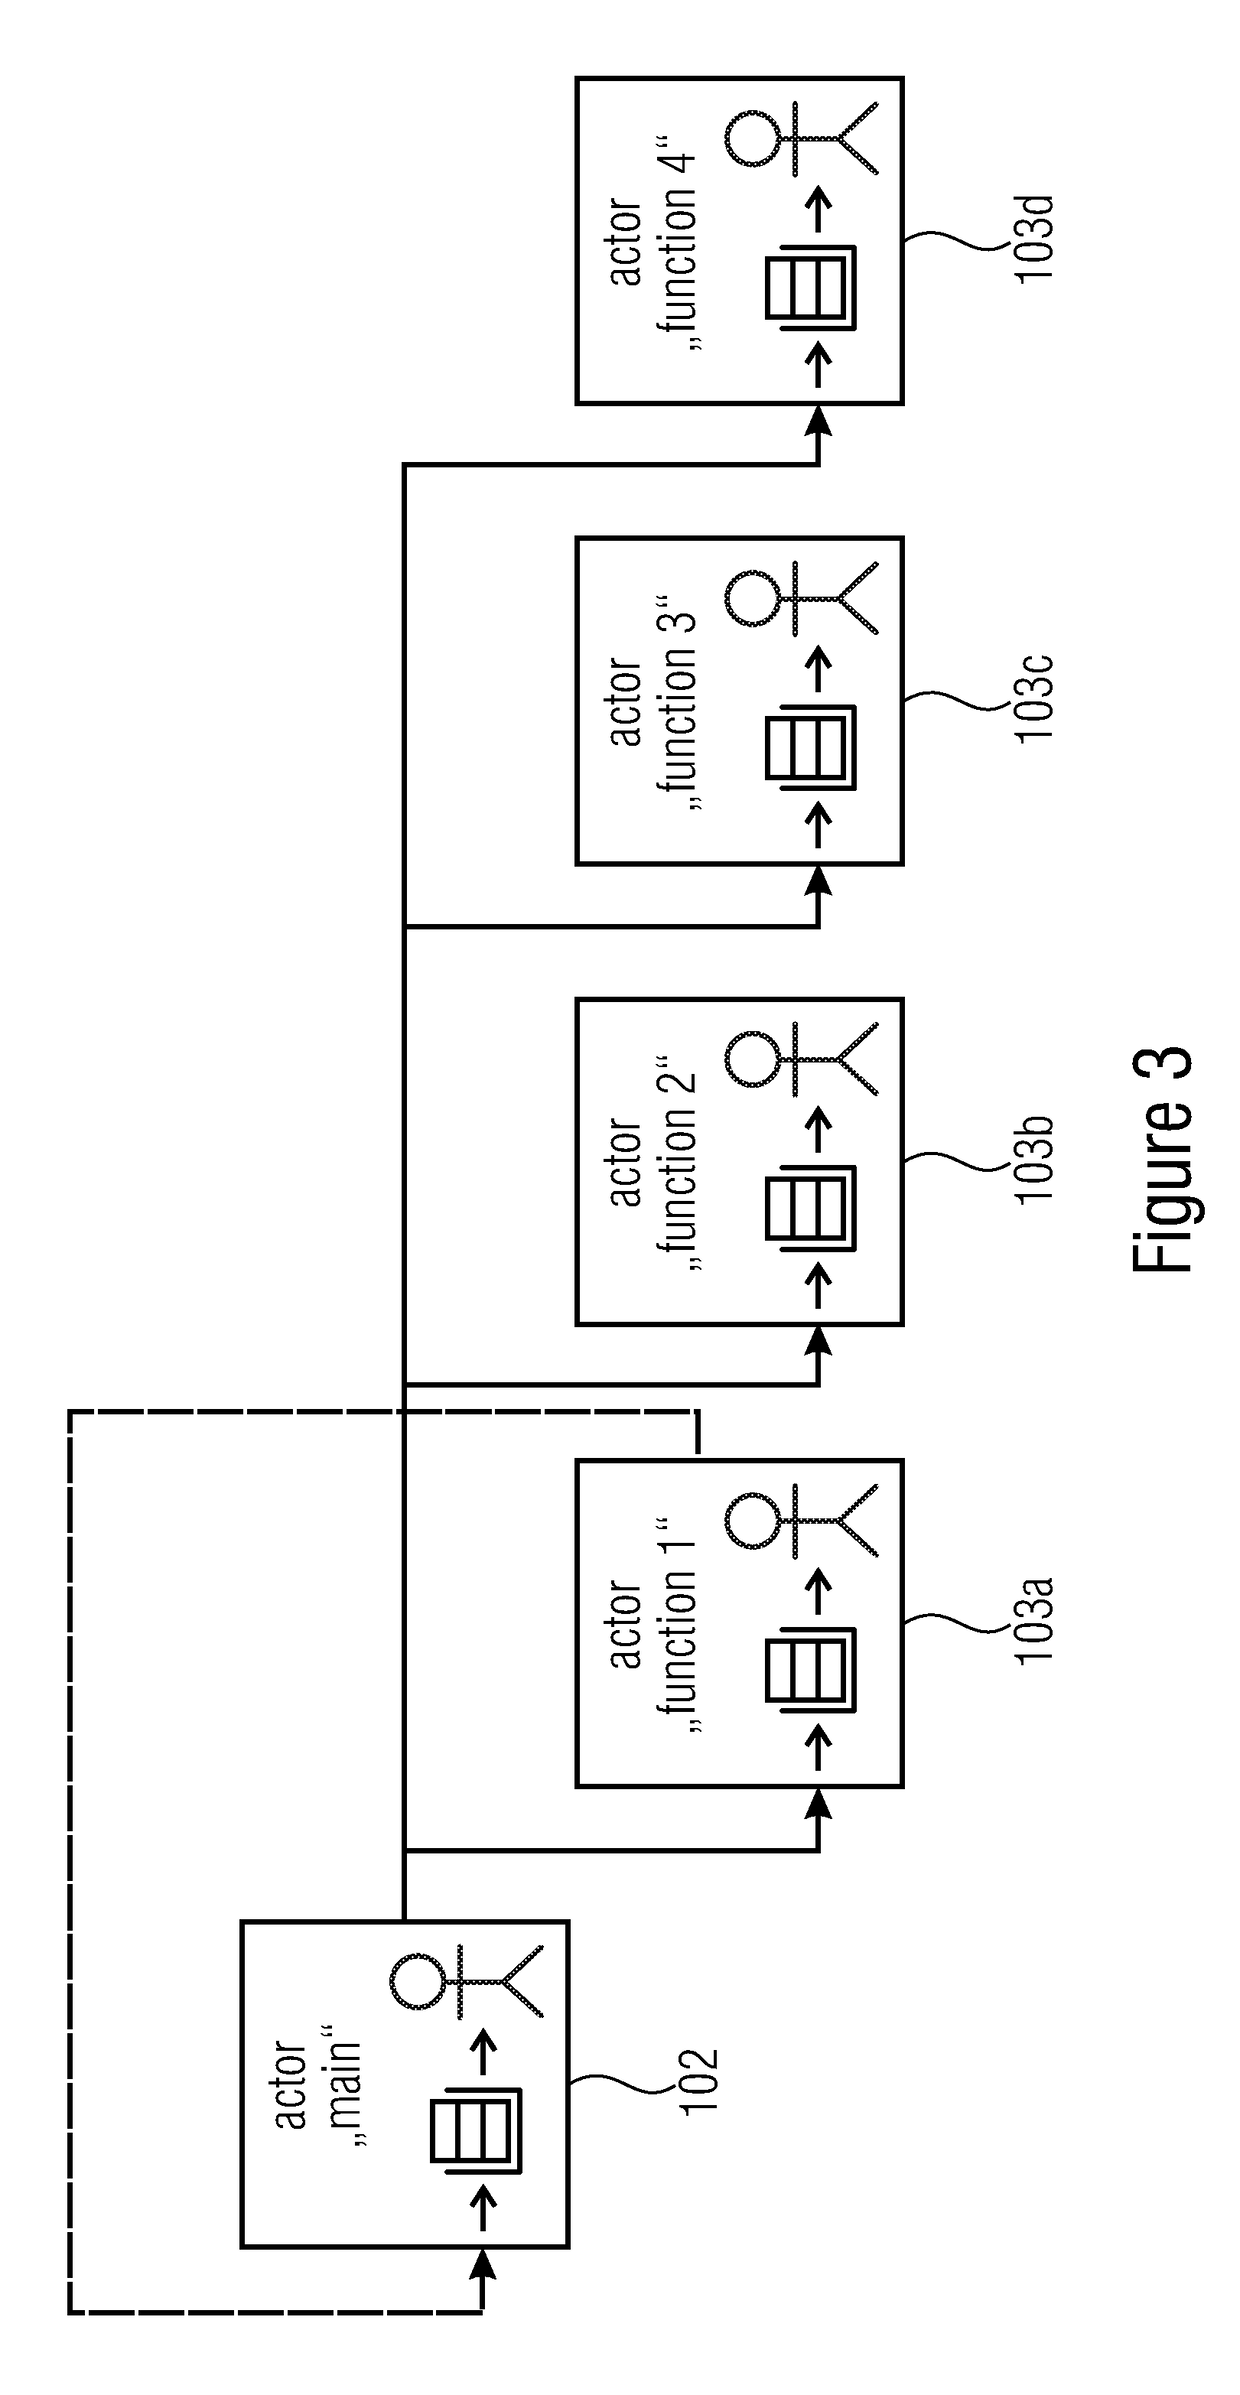 Deterministic concurrent test program executor for an automated test equipment